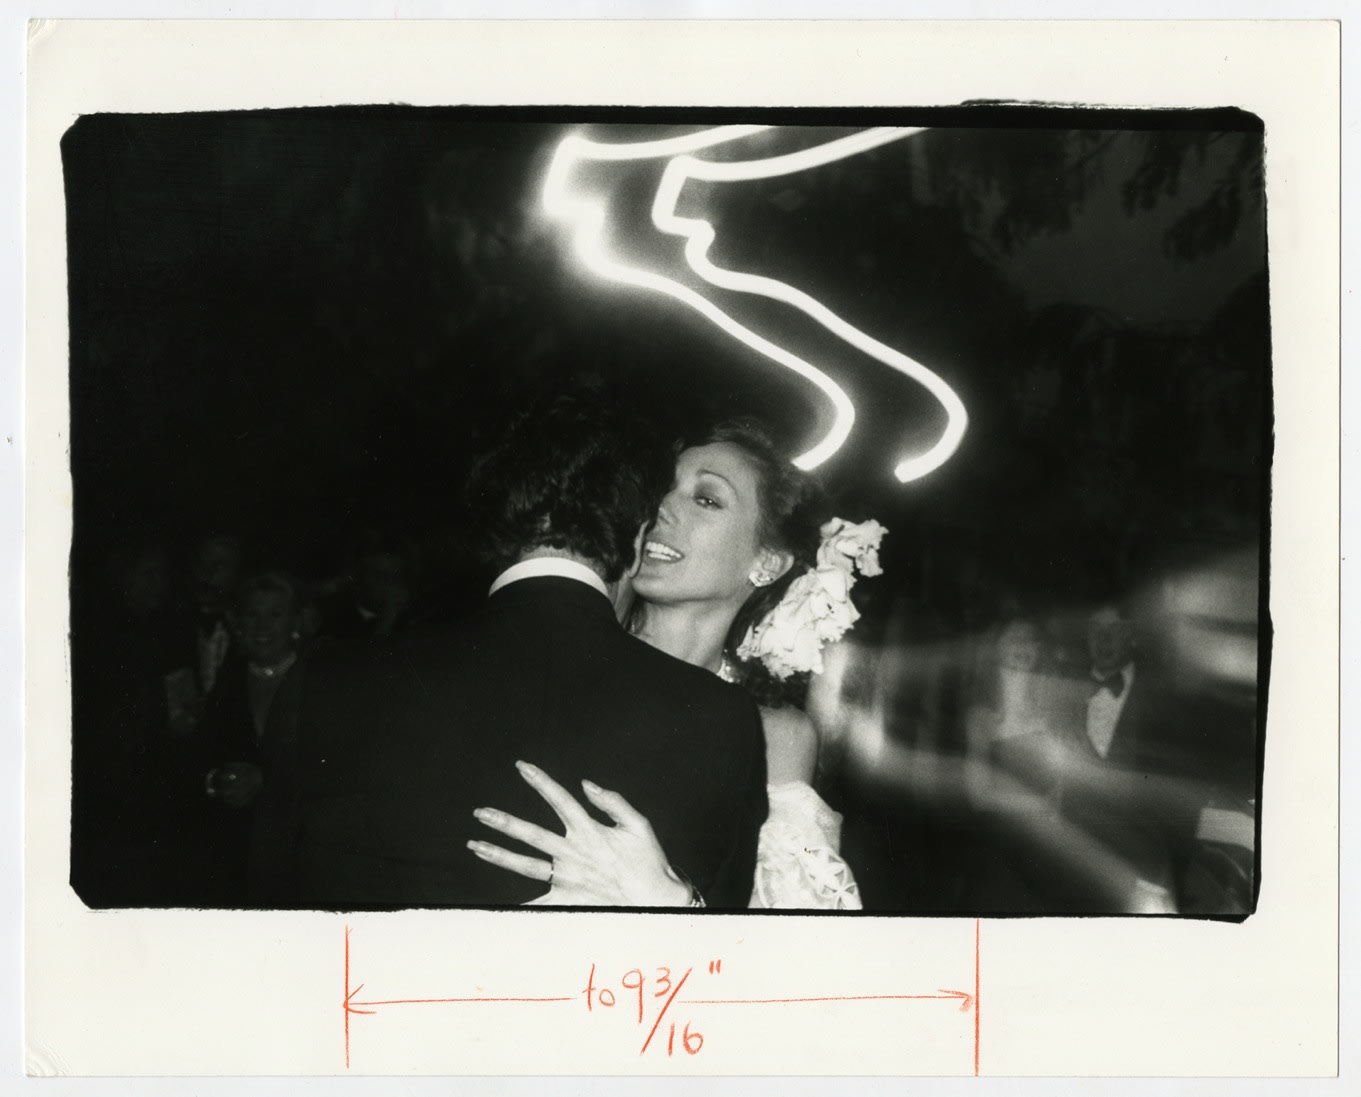 <a href="/content/feature/4399/detail/image43112/" class="pageload-link-type-popup-enabled-content"><p><span class="cms_size_1"><em>James Randall and Marisa Berenson, on their Wedding Day, Beverly Hills, 1976,</em> 1976</span><br /><span class="cms_size_1">Vintage gelatin silver print</span><br /><span class="cms_size_1">20.3 x 25.4 cm (8 x 10 in)</span></p></a>